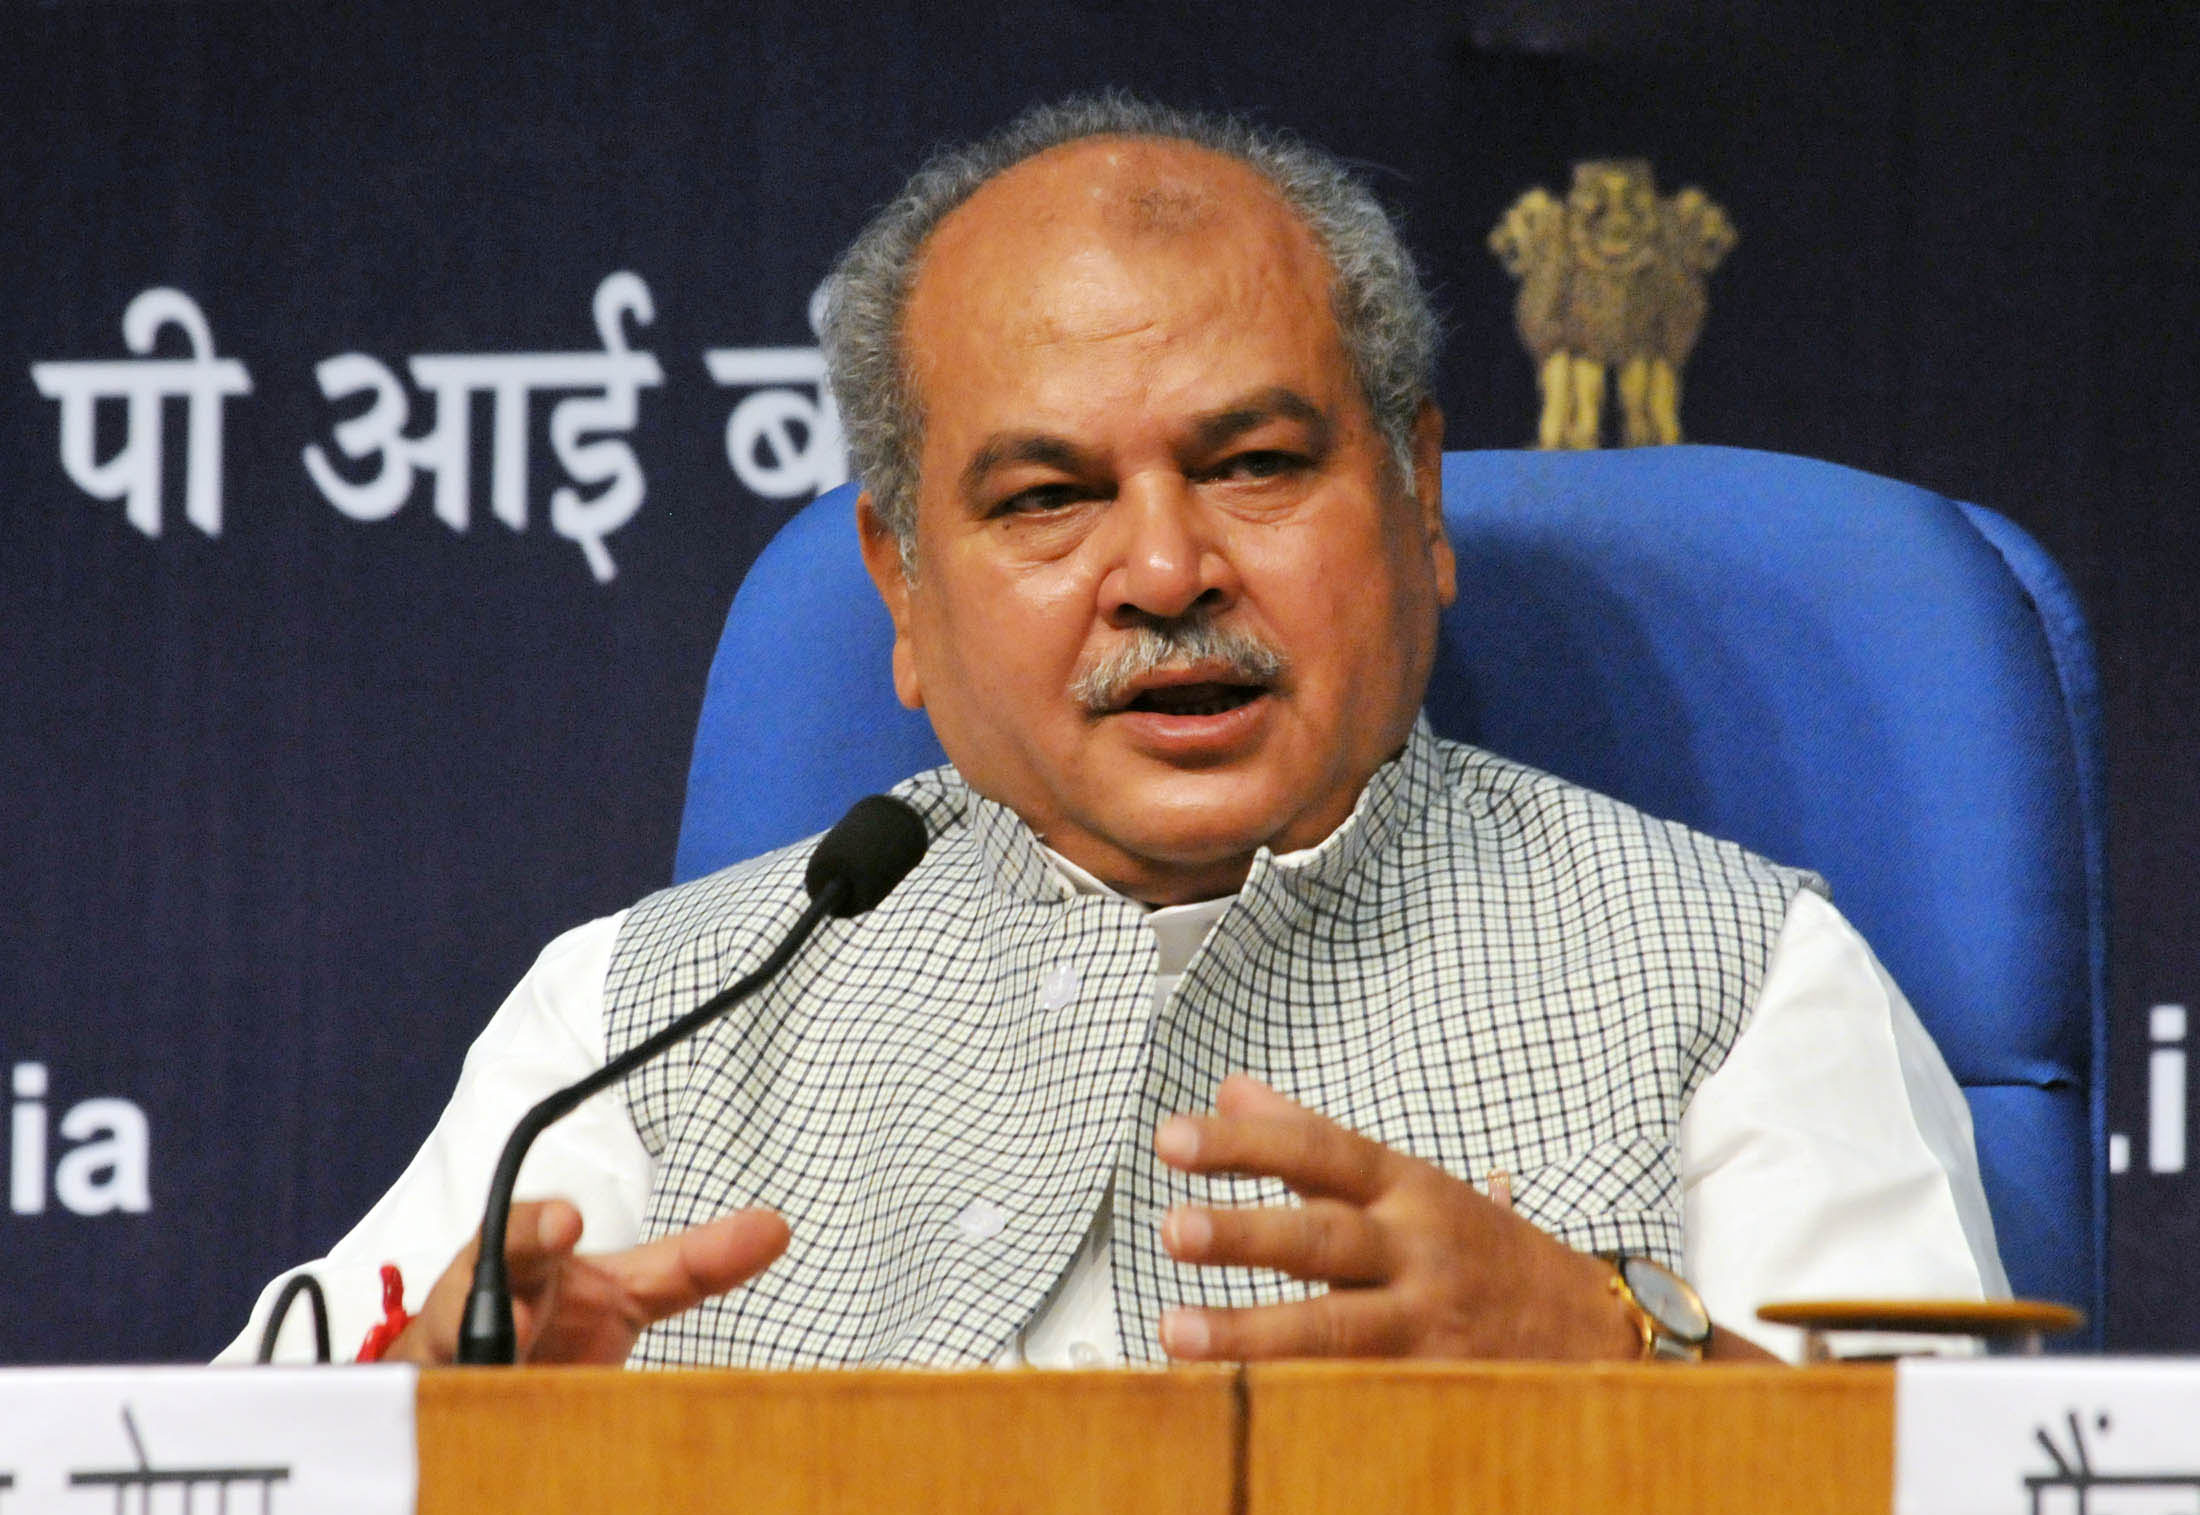 Amid farmers protest against farm laws 2020, Agriculture Minister Narendra Singh Tomar said that the Centre's proposal was with farmers.